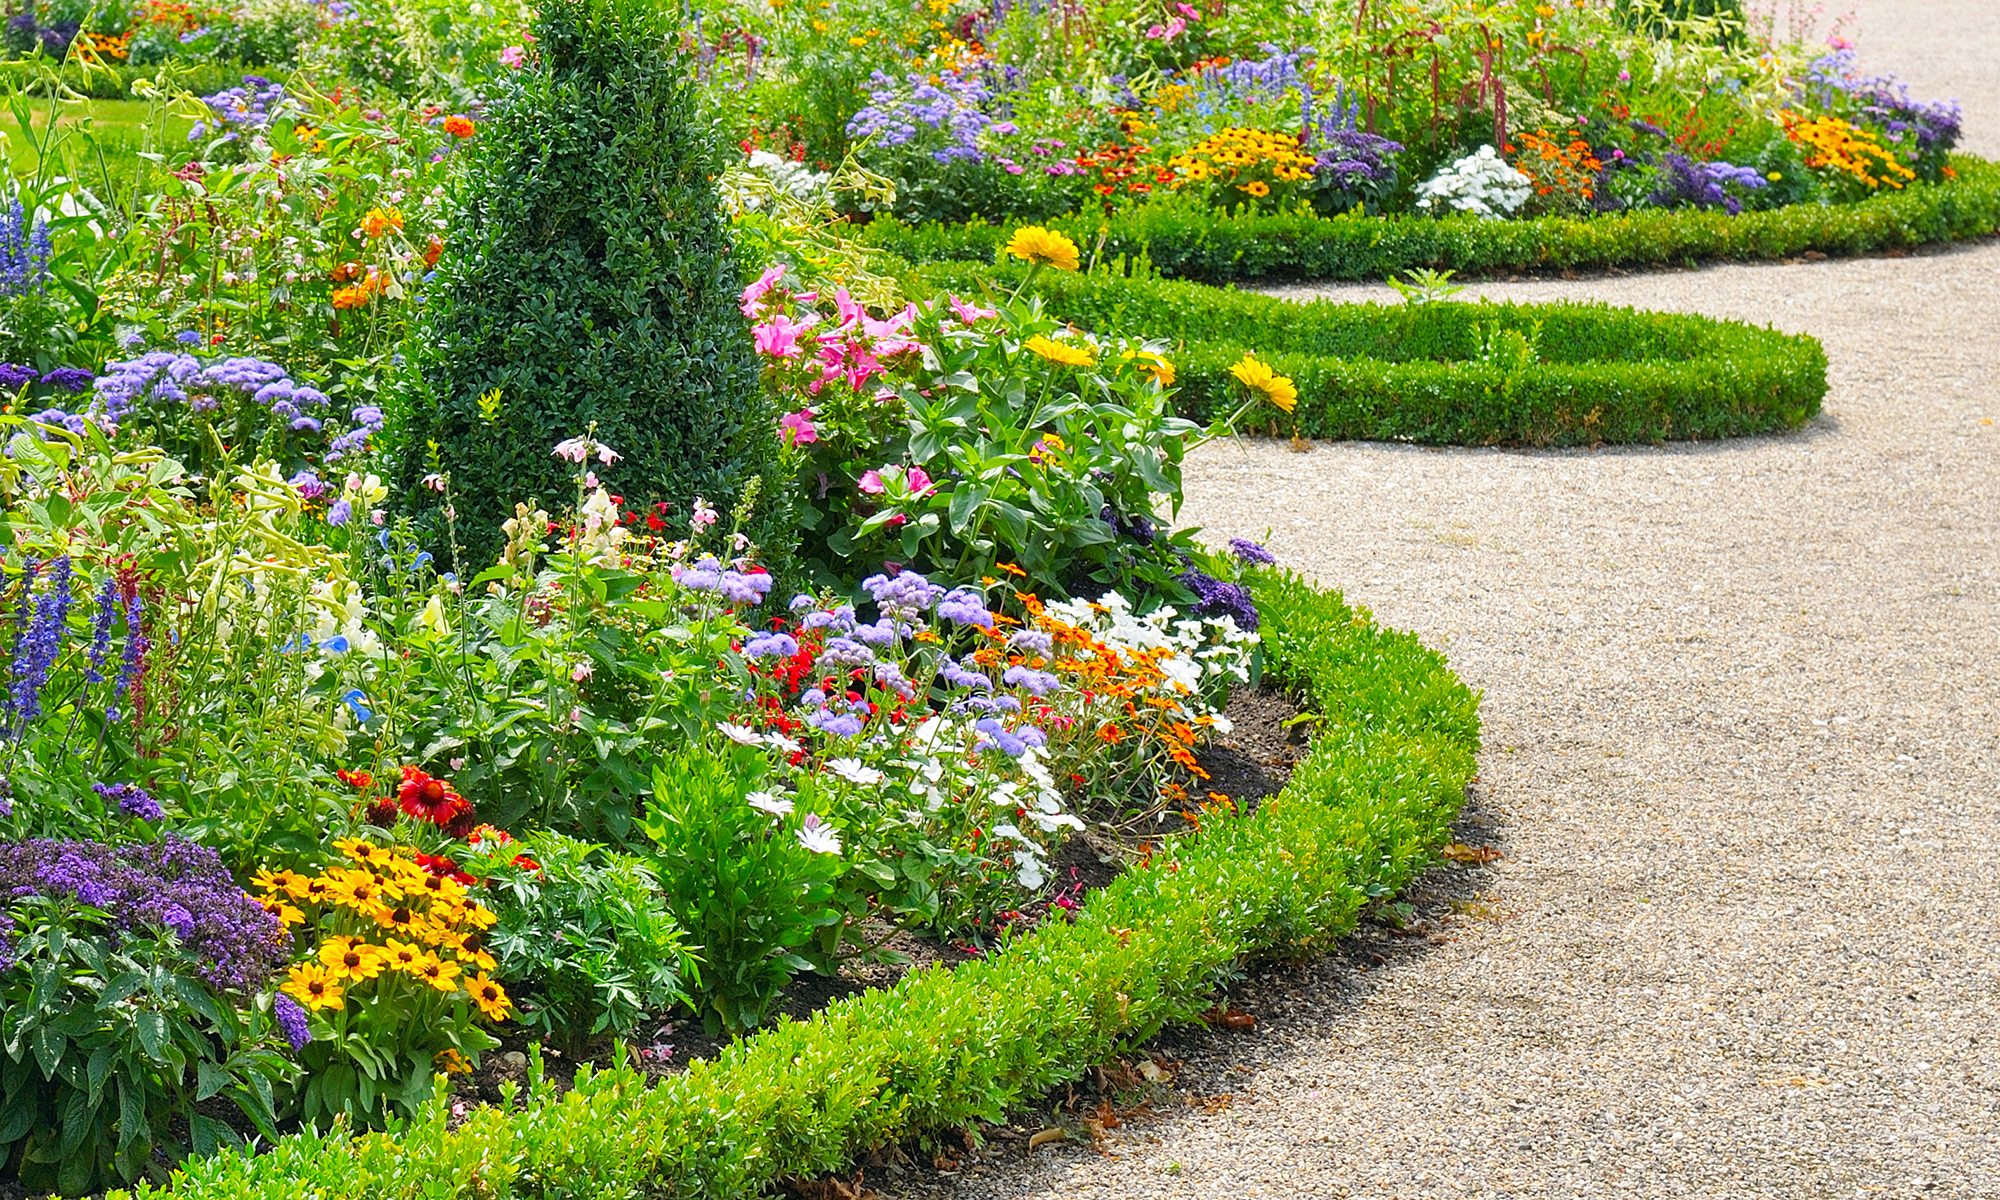 The Dunaway Gardens are one of the largest natural rock and flower gardens in the south of USA